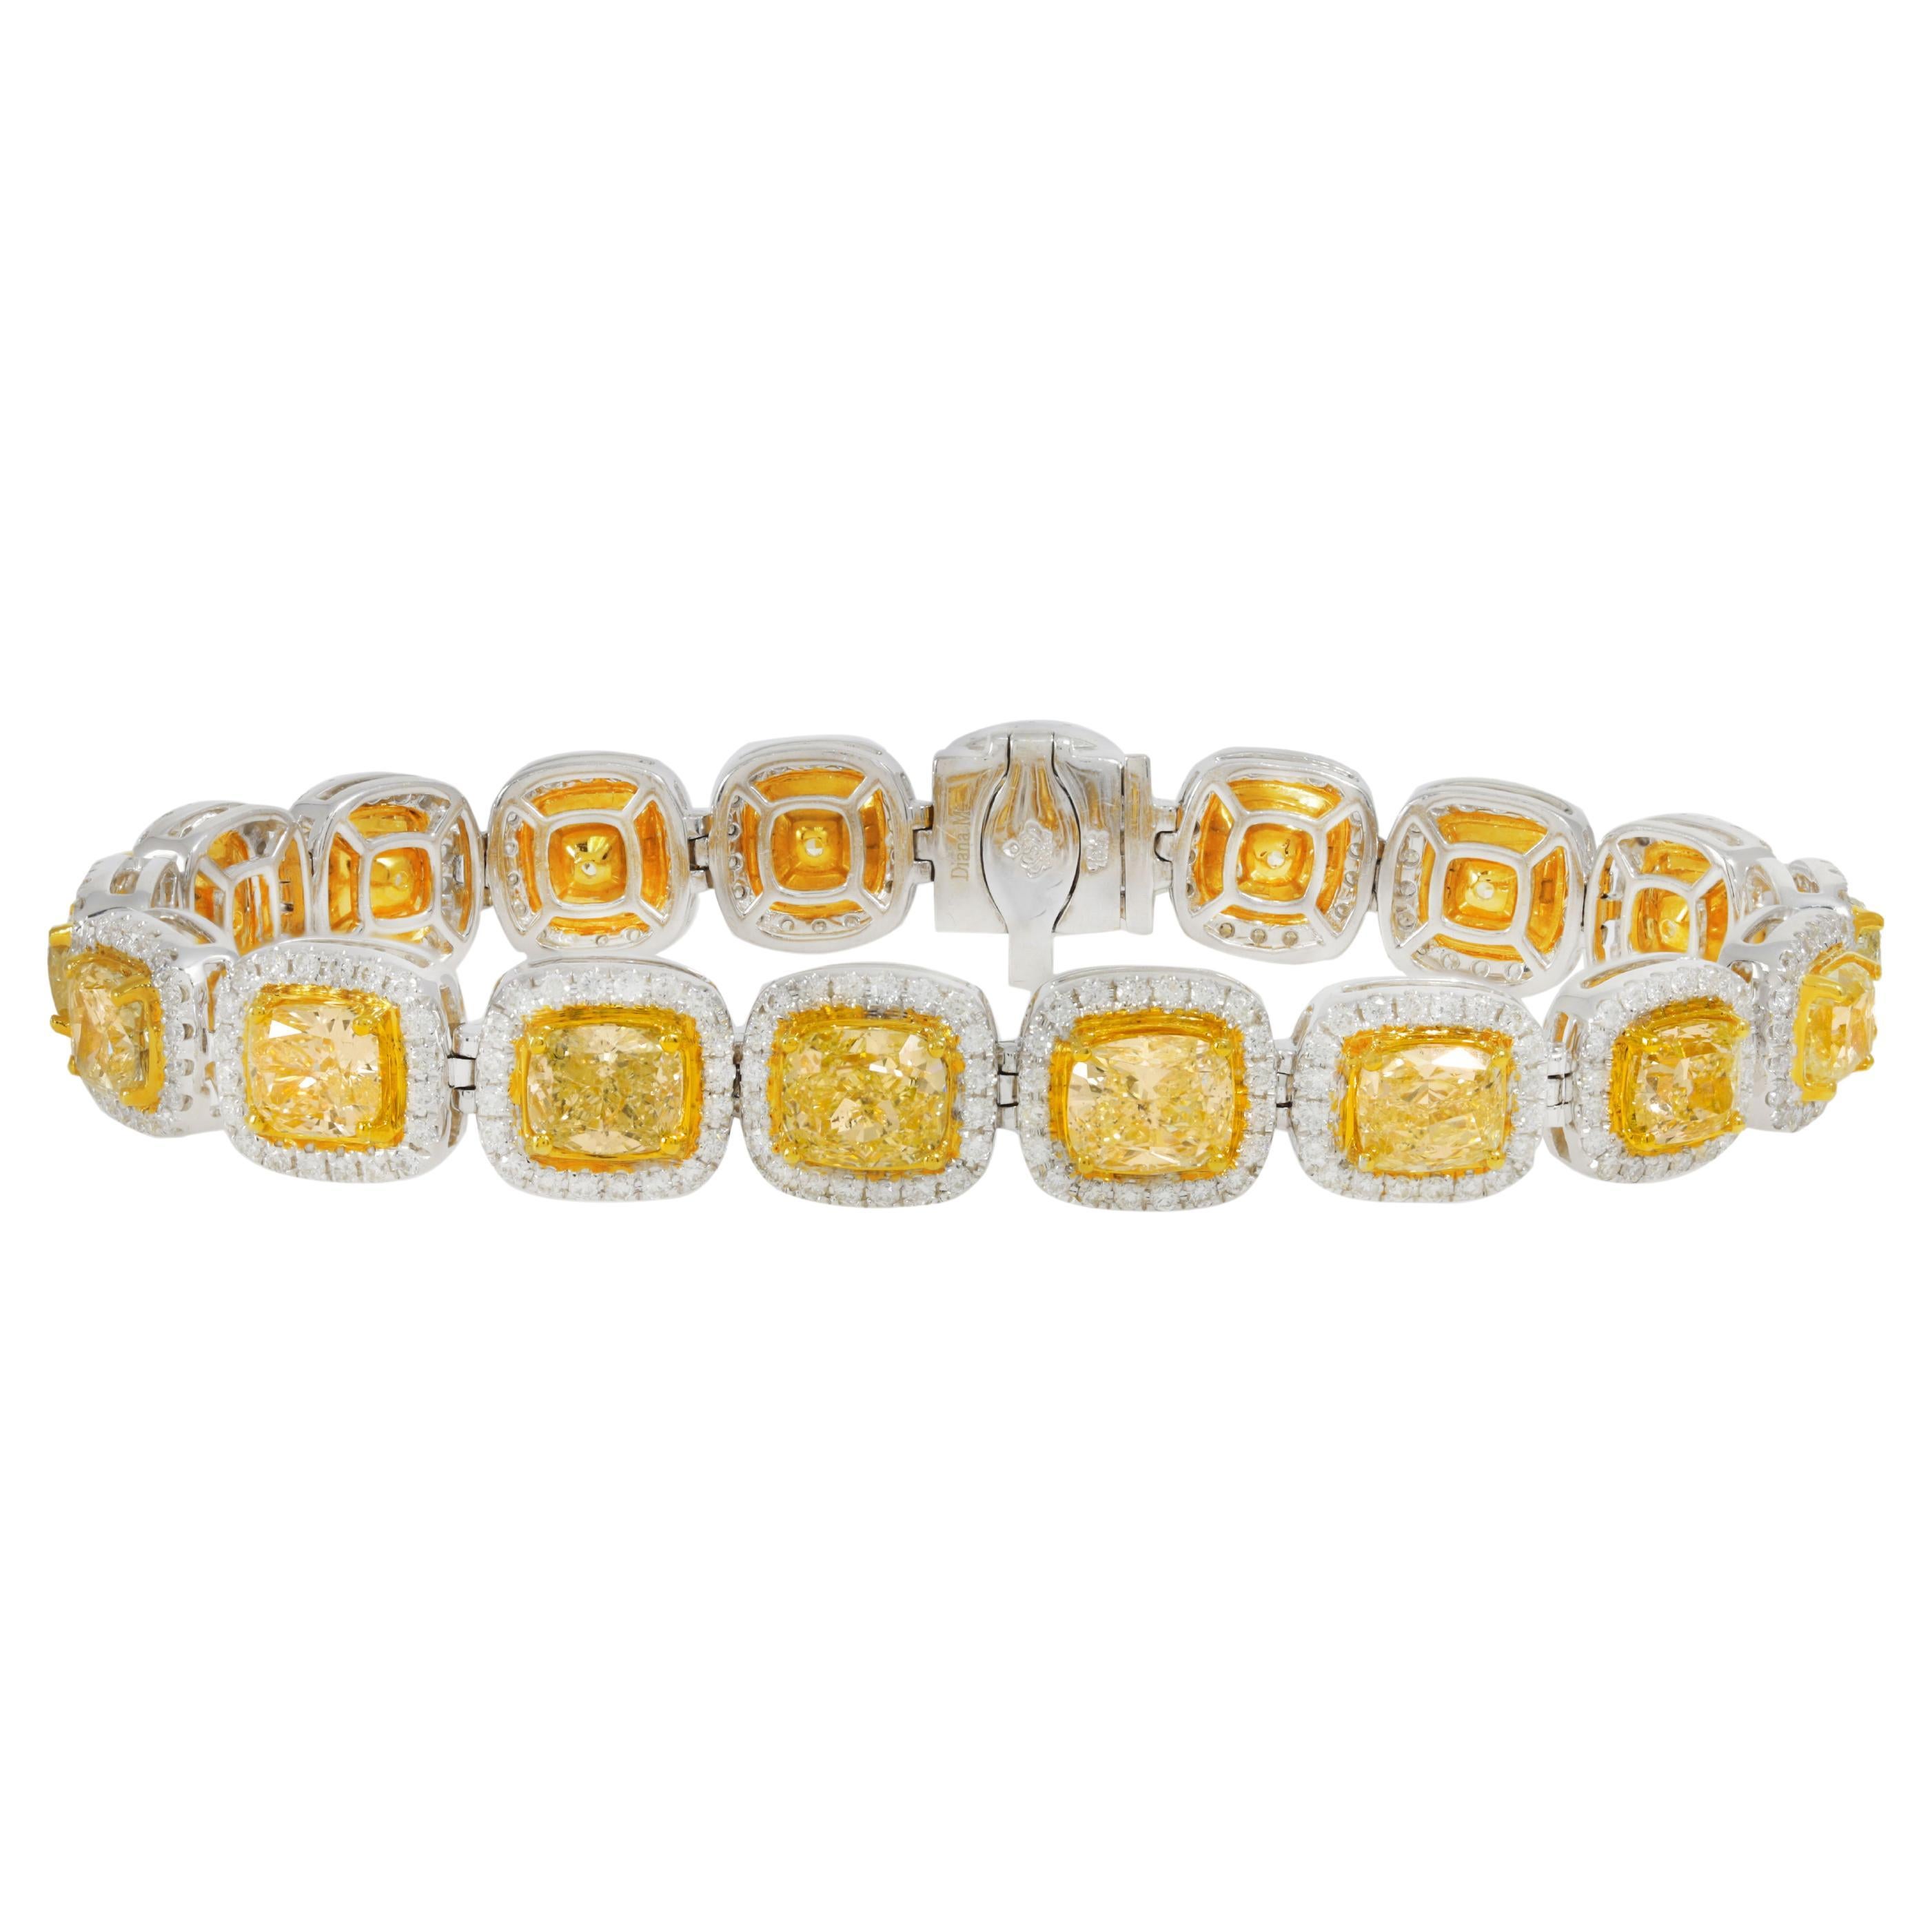 Diana M. Diamond fashion braclet featuring 21.20cts of custion cut fancy yellows For Sale